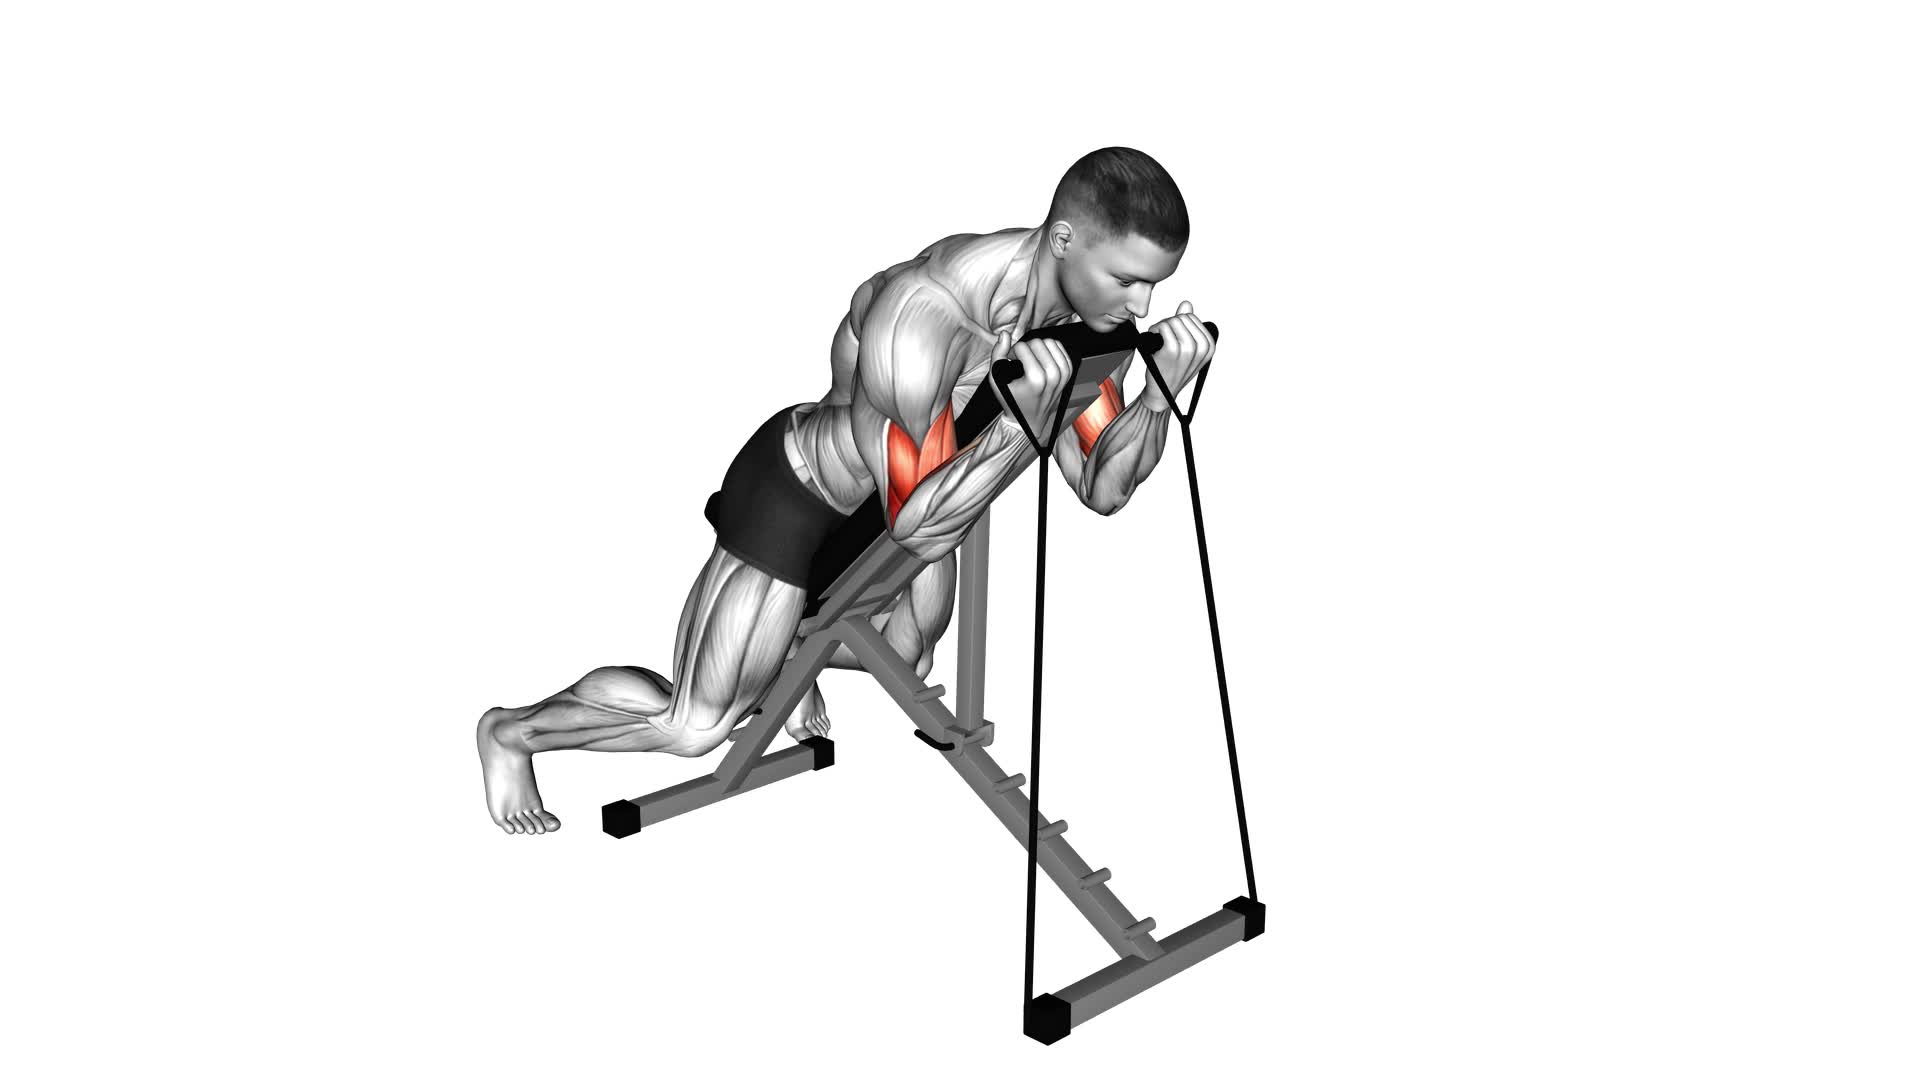 Band Prone Incline Curl - Video Exercise Guide & Tips